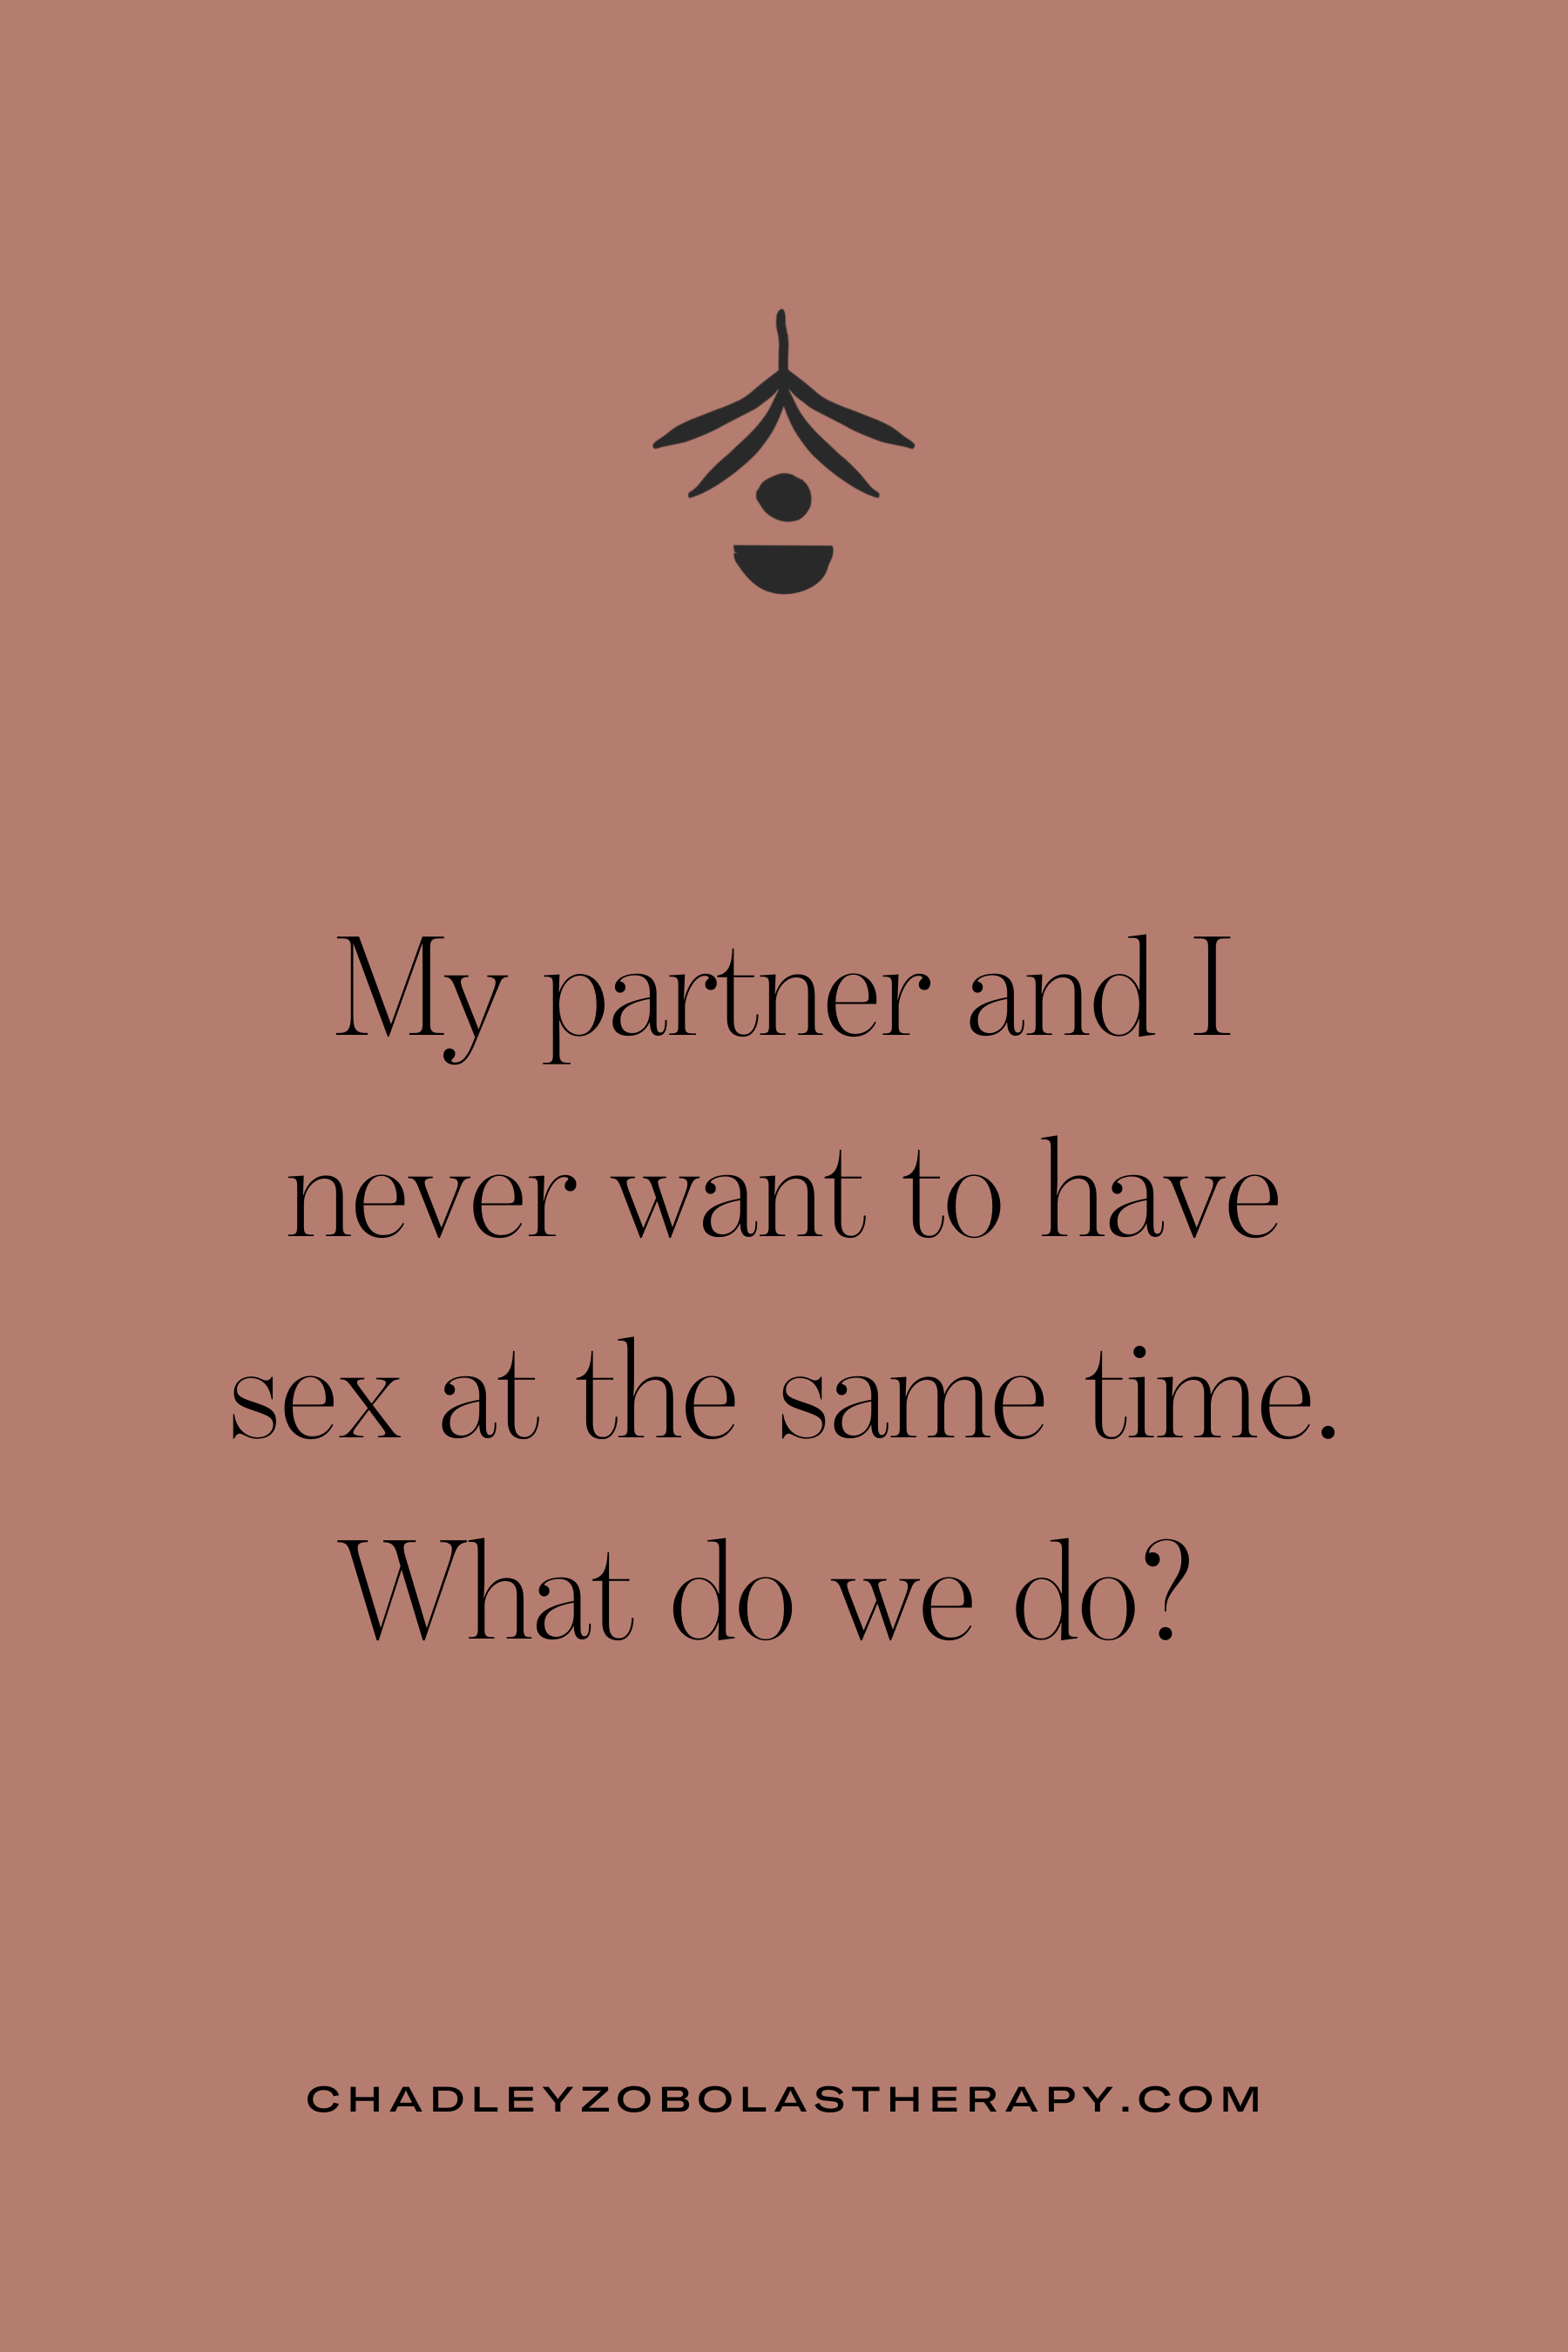 My partner and I never want to have sex at the same time picture